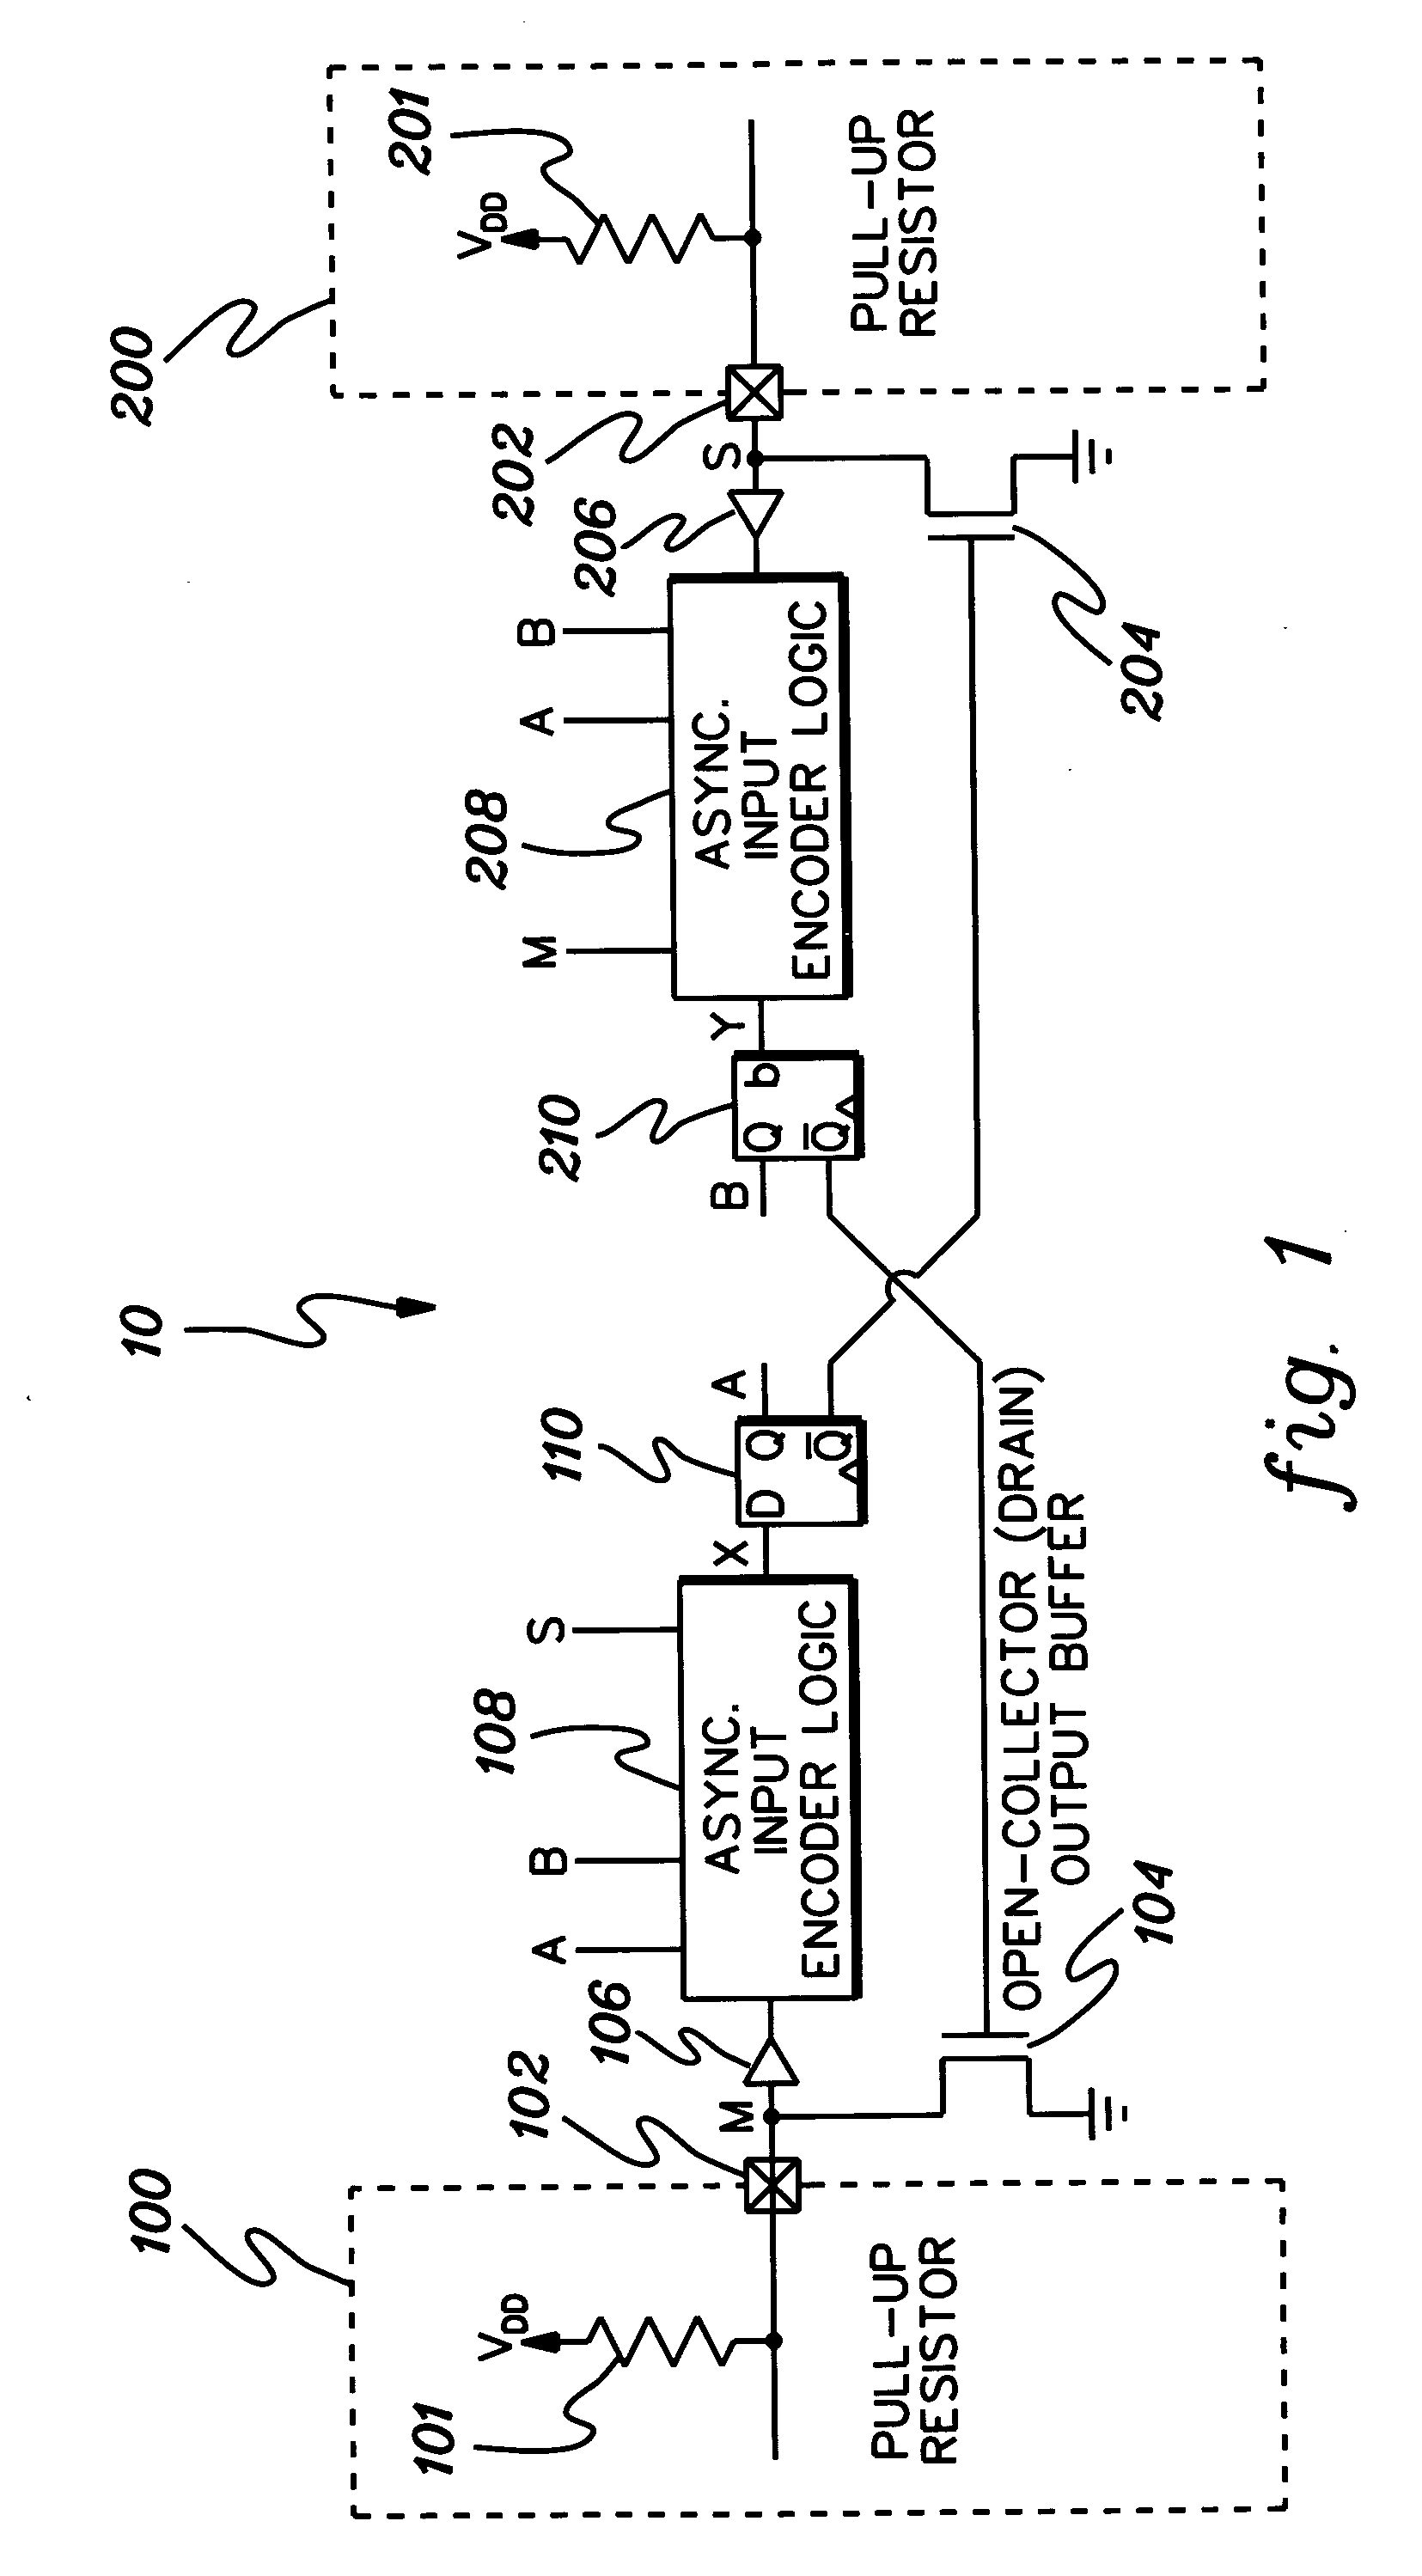 System, method and program product for extending range of a bidirectional data communication bus